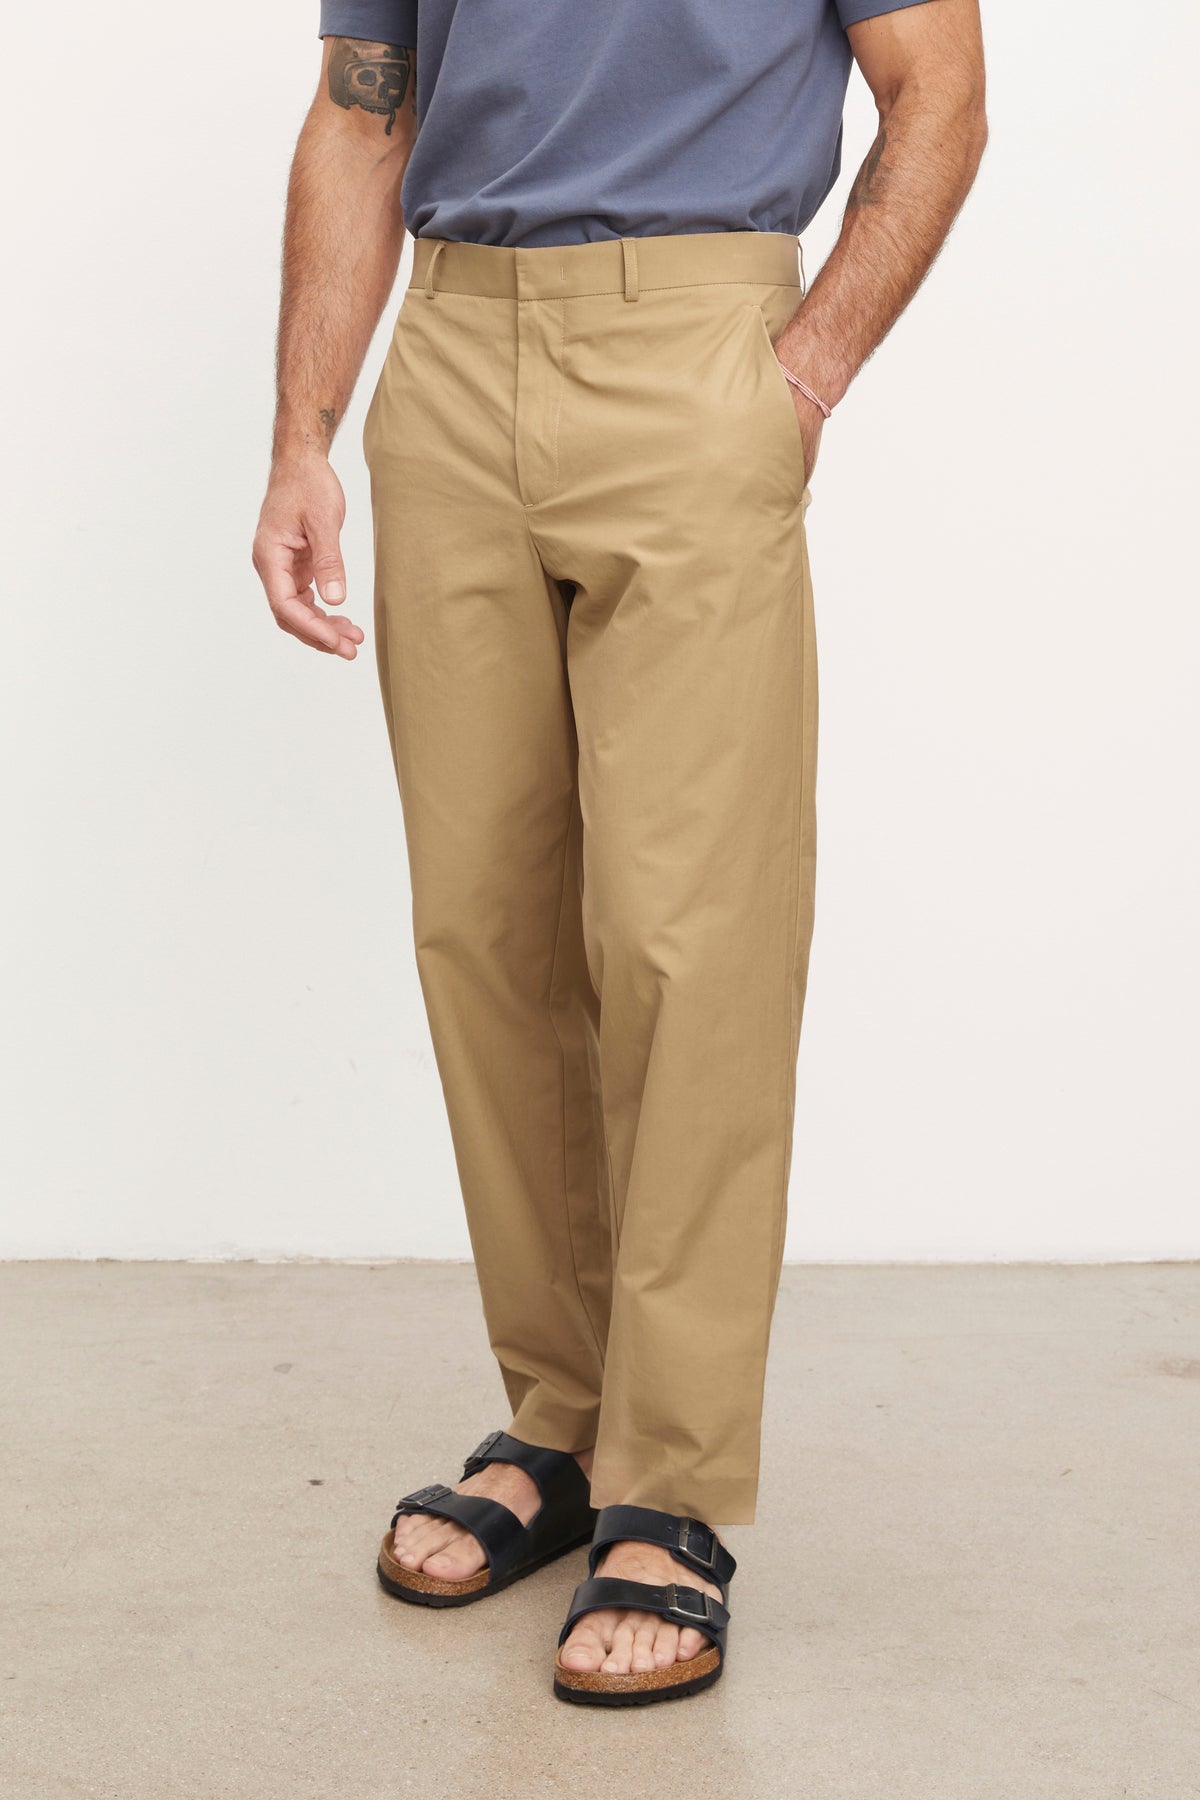   The man is wearing STING POPLIN PANT by Velvet by Graham & Spencer and sandals. 